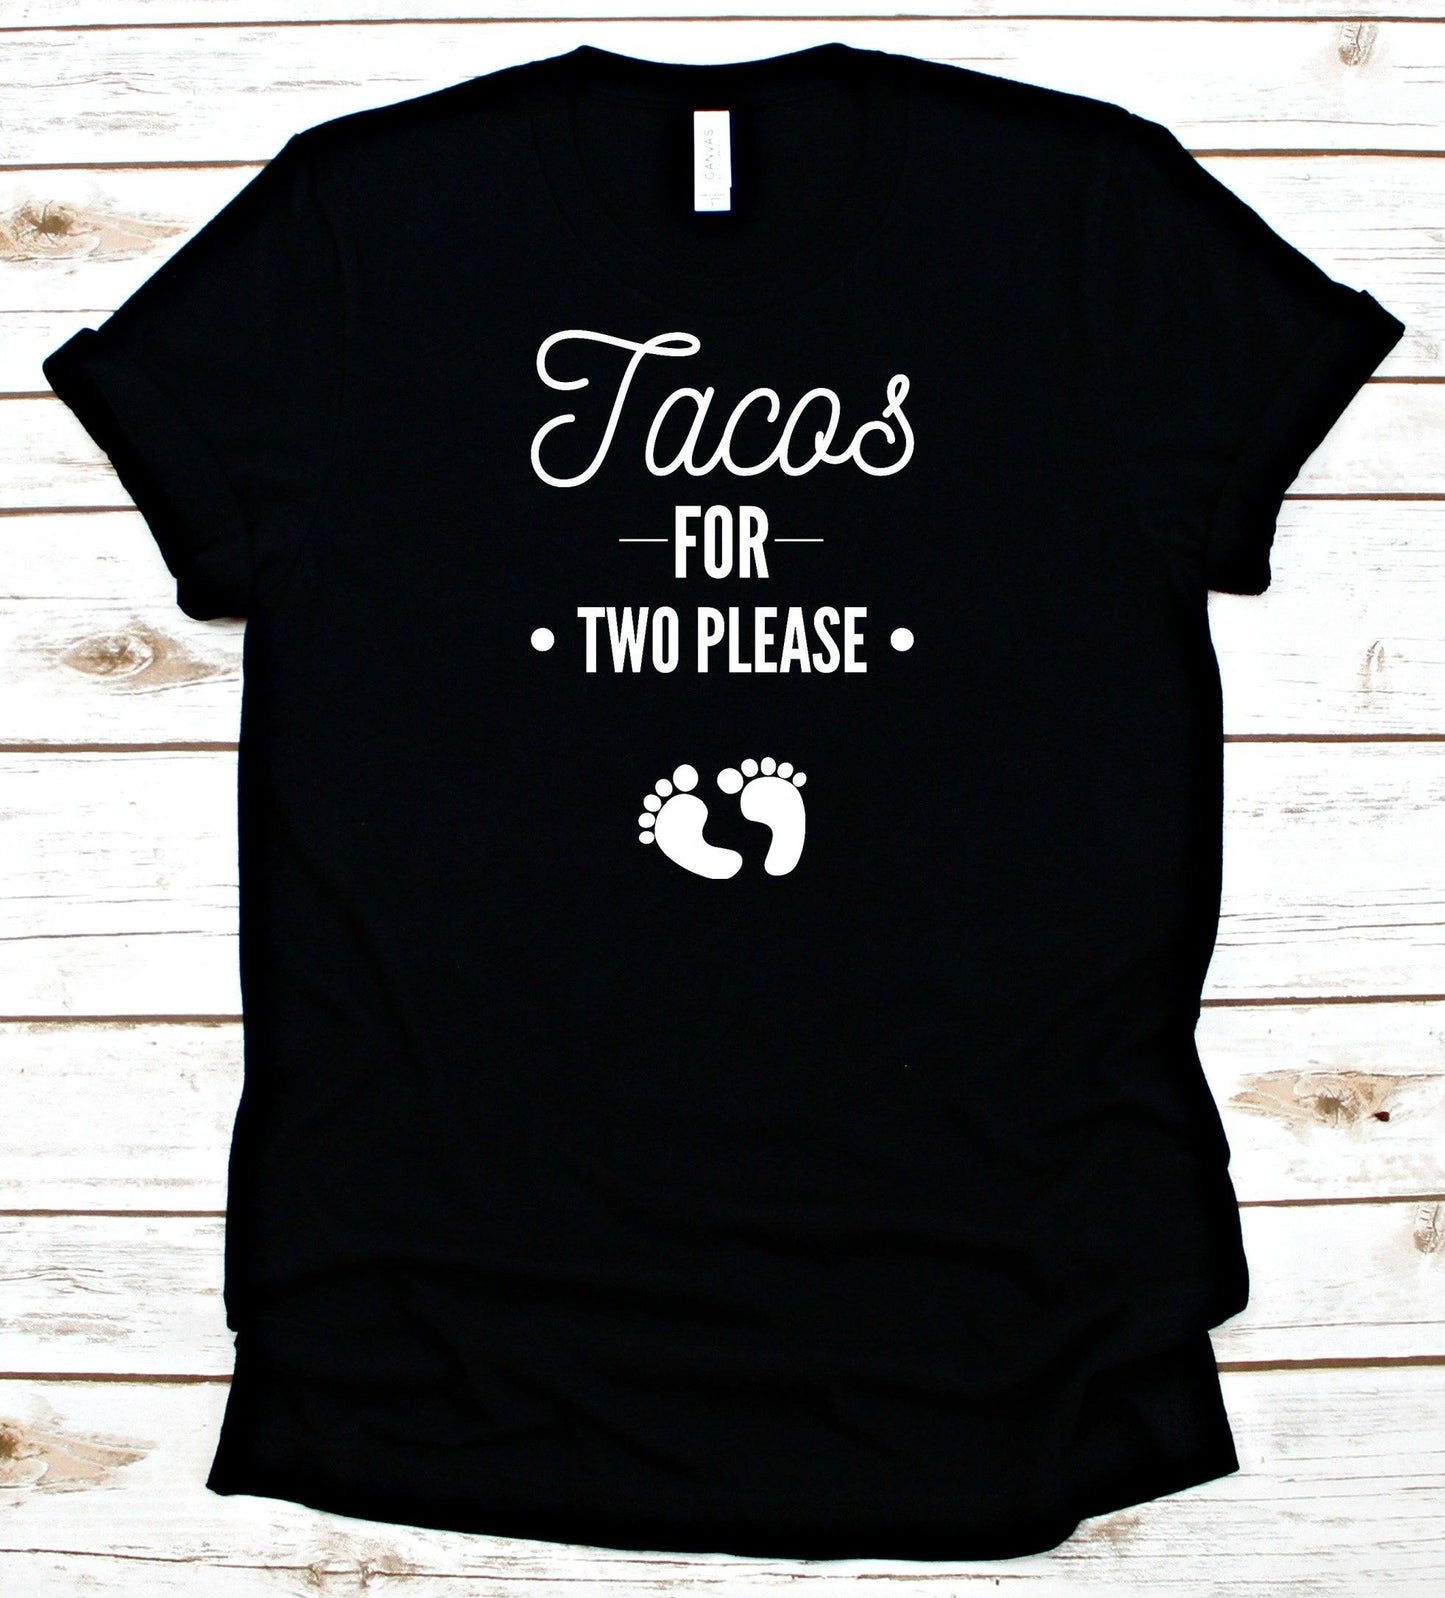 Tacos For Two/Tequila for One - Mom Version